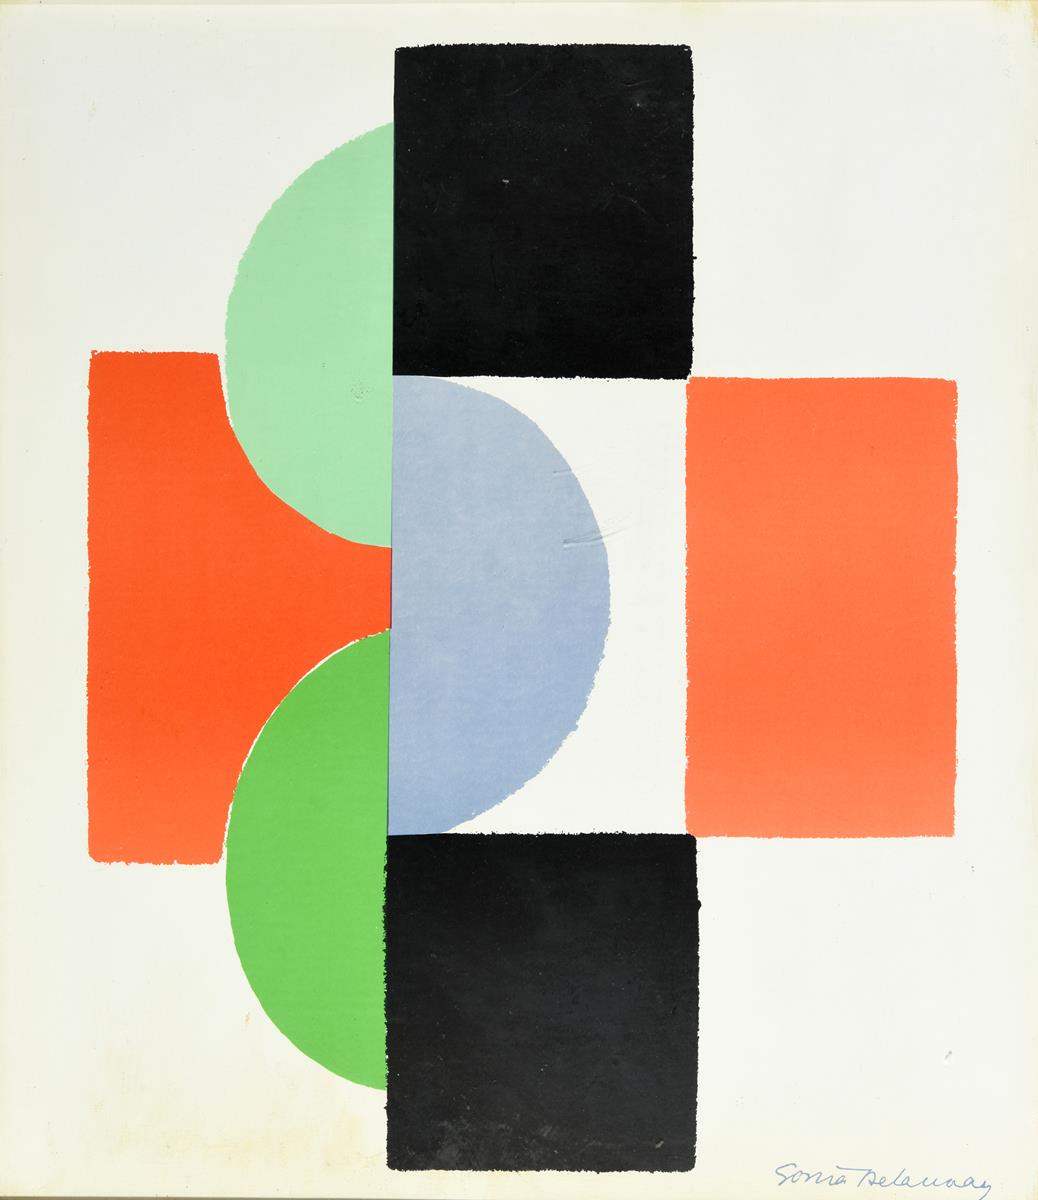 Sonia Delaunay (1885-1979), untitled composition in red, black, grey and green, colour lithograph, - Image 2 of 2